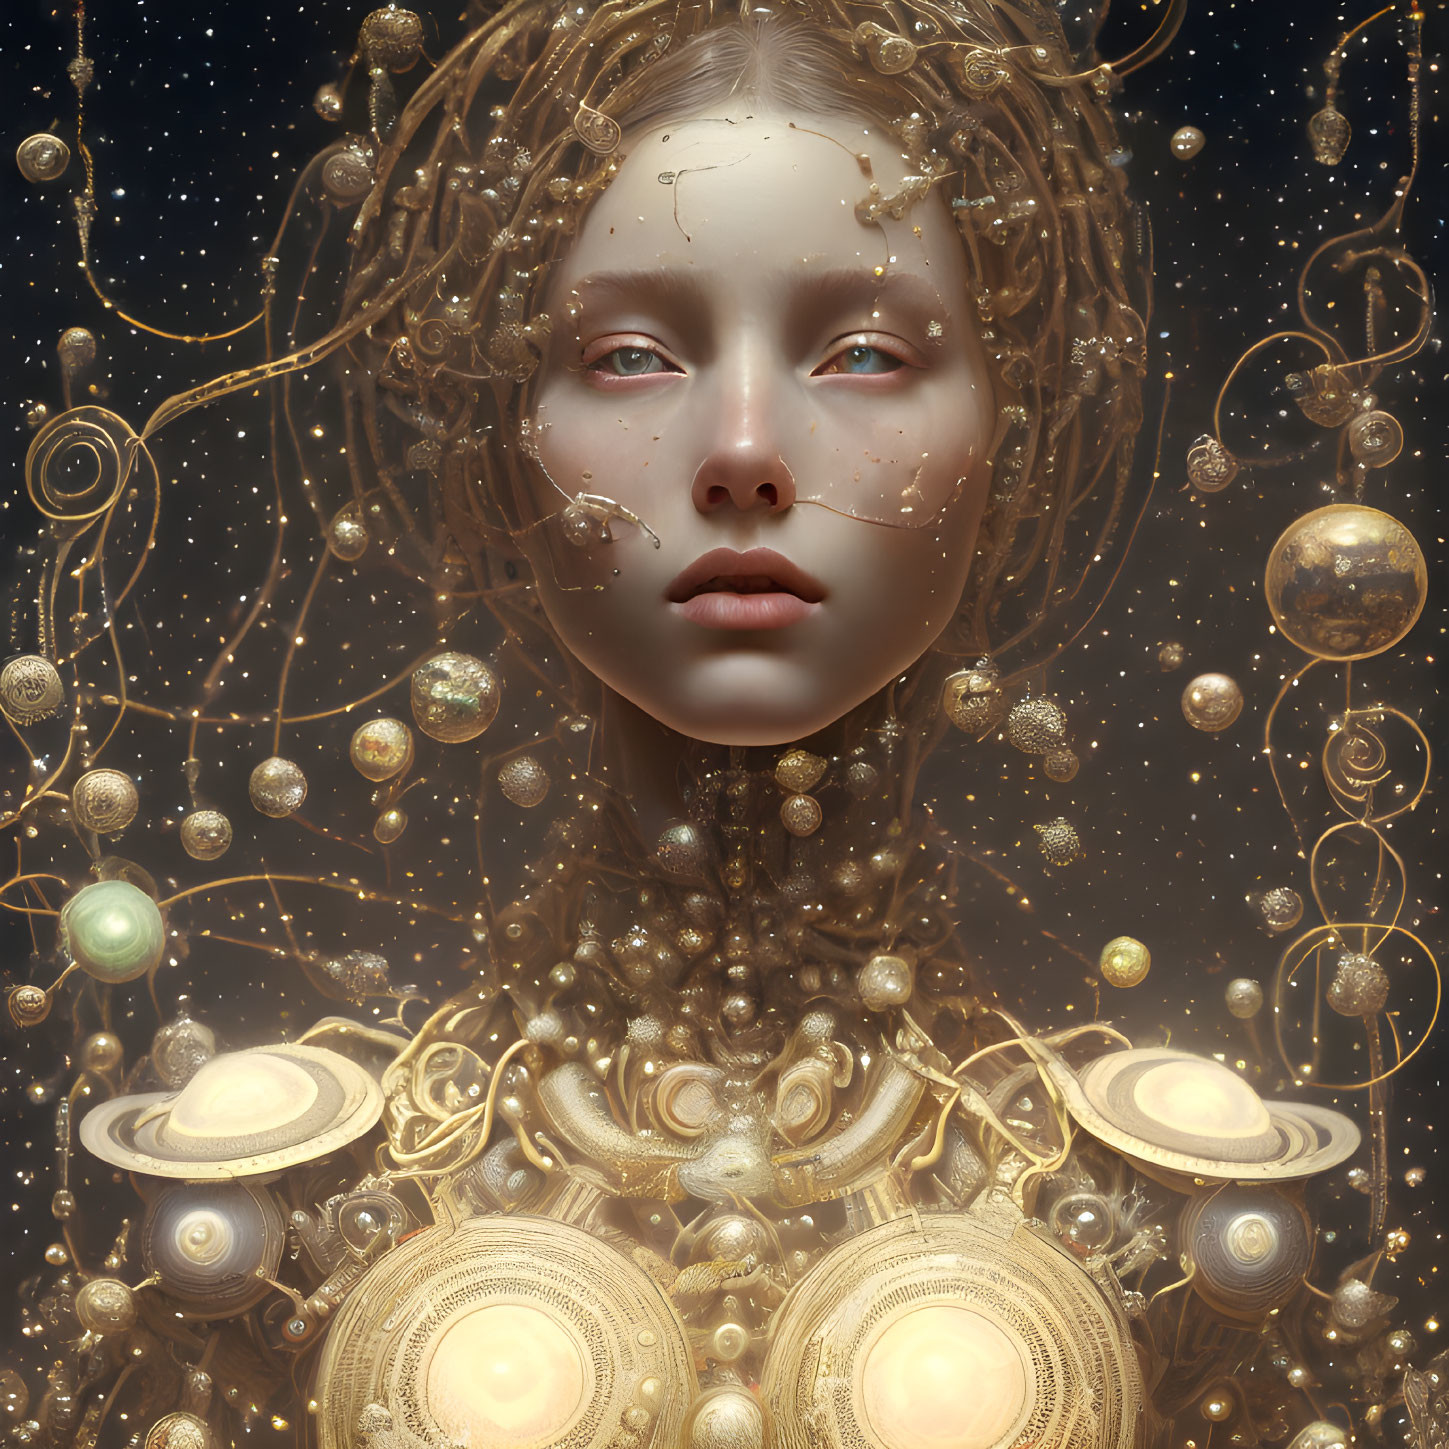 Surreal portrait of female figure with golden cosmic ornaments